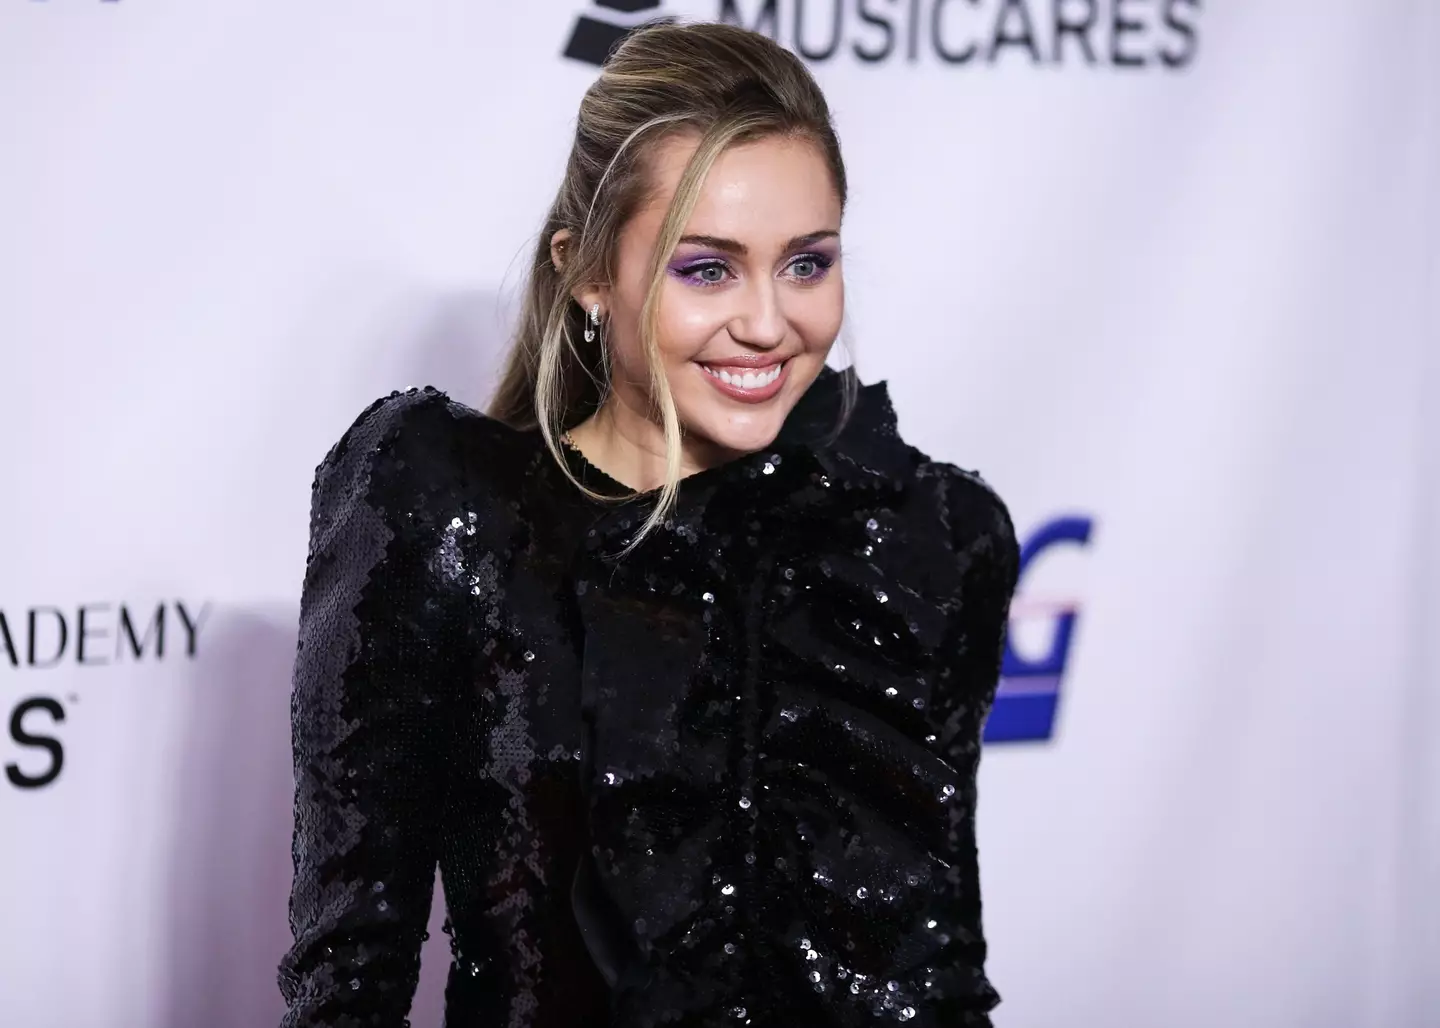 Miley Cyrus has opened up about her past antics.